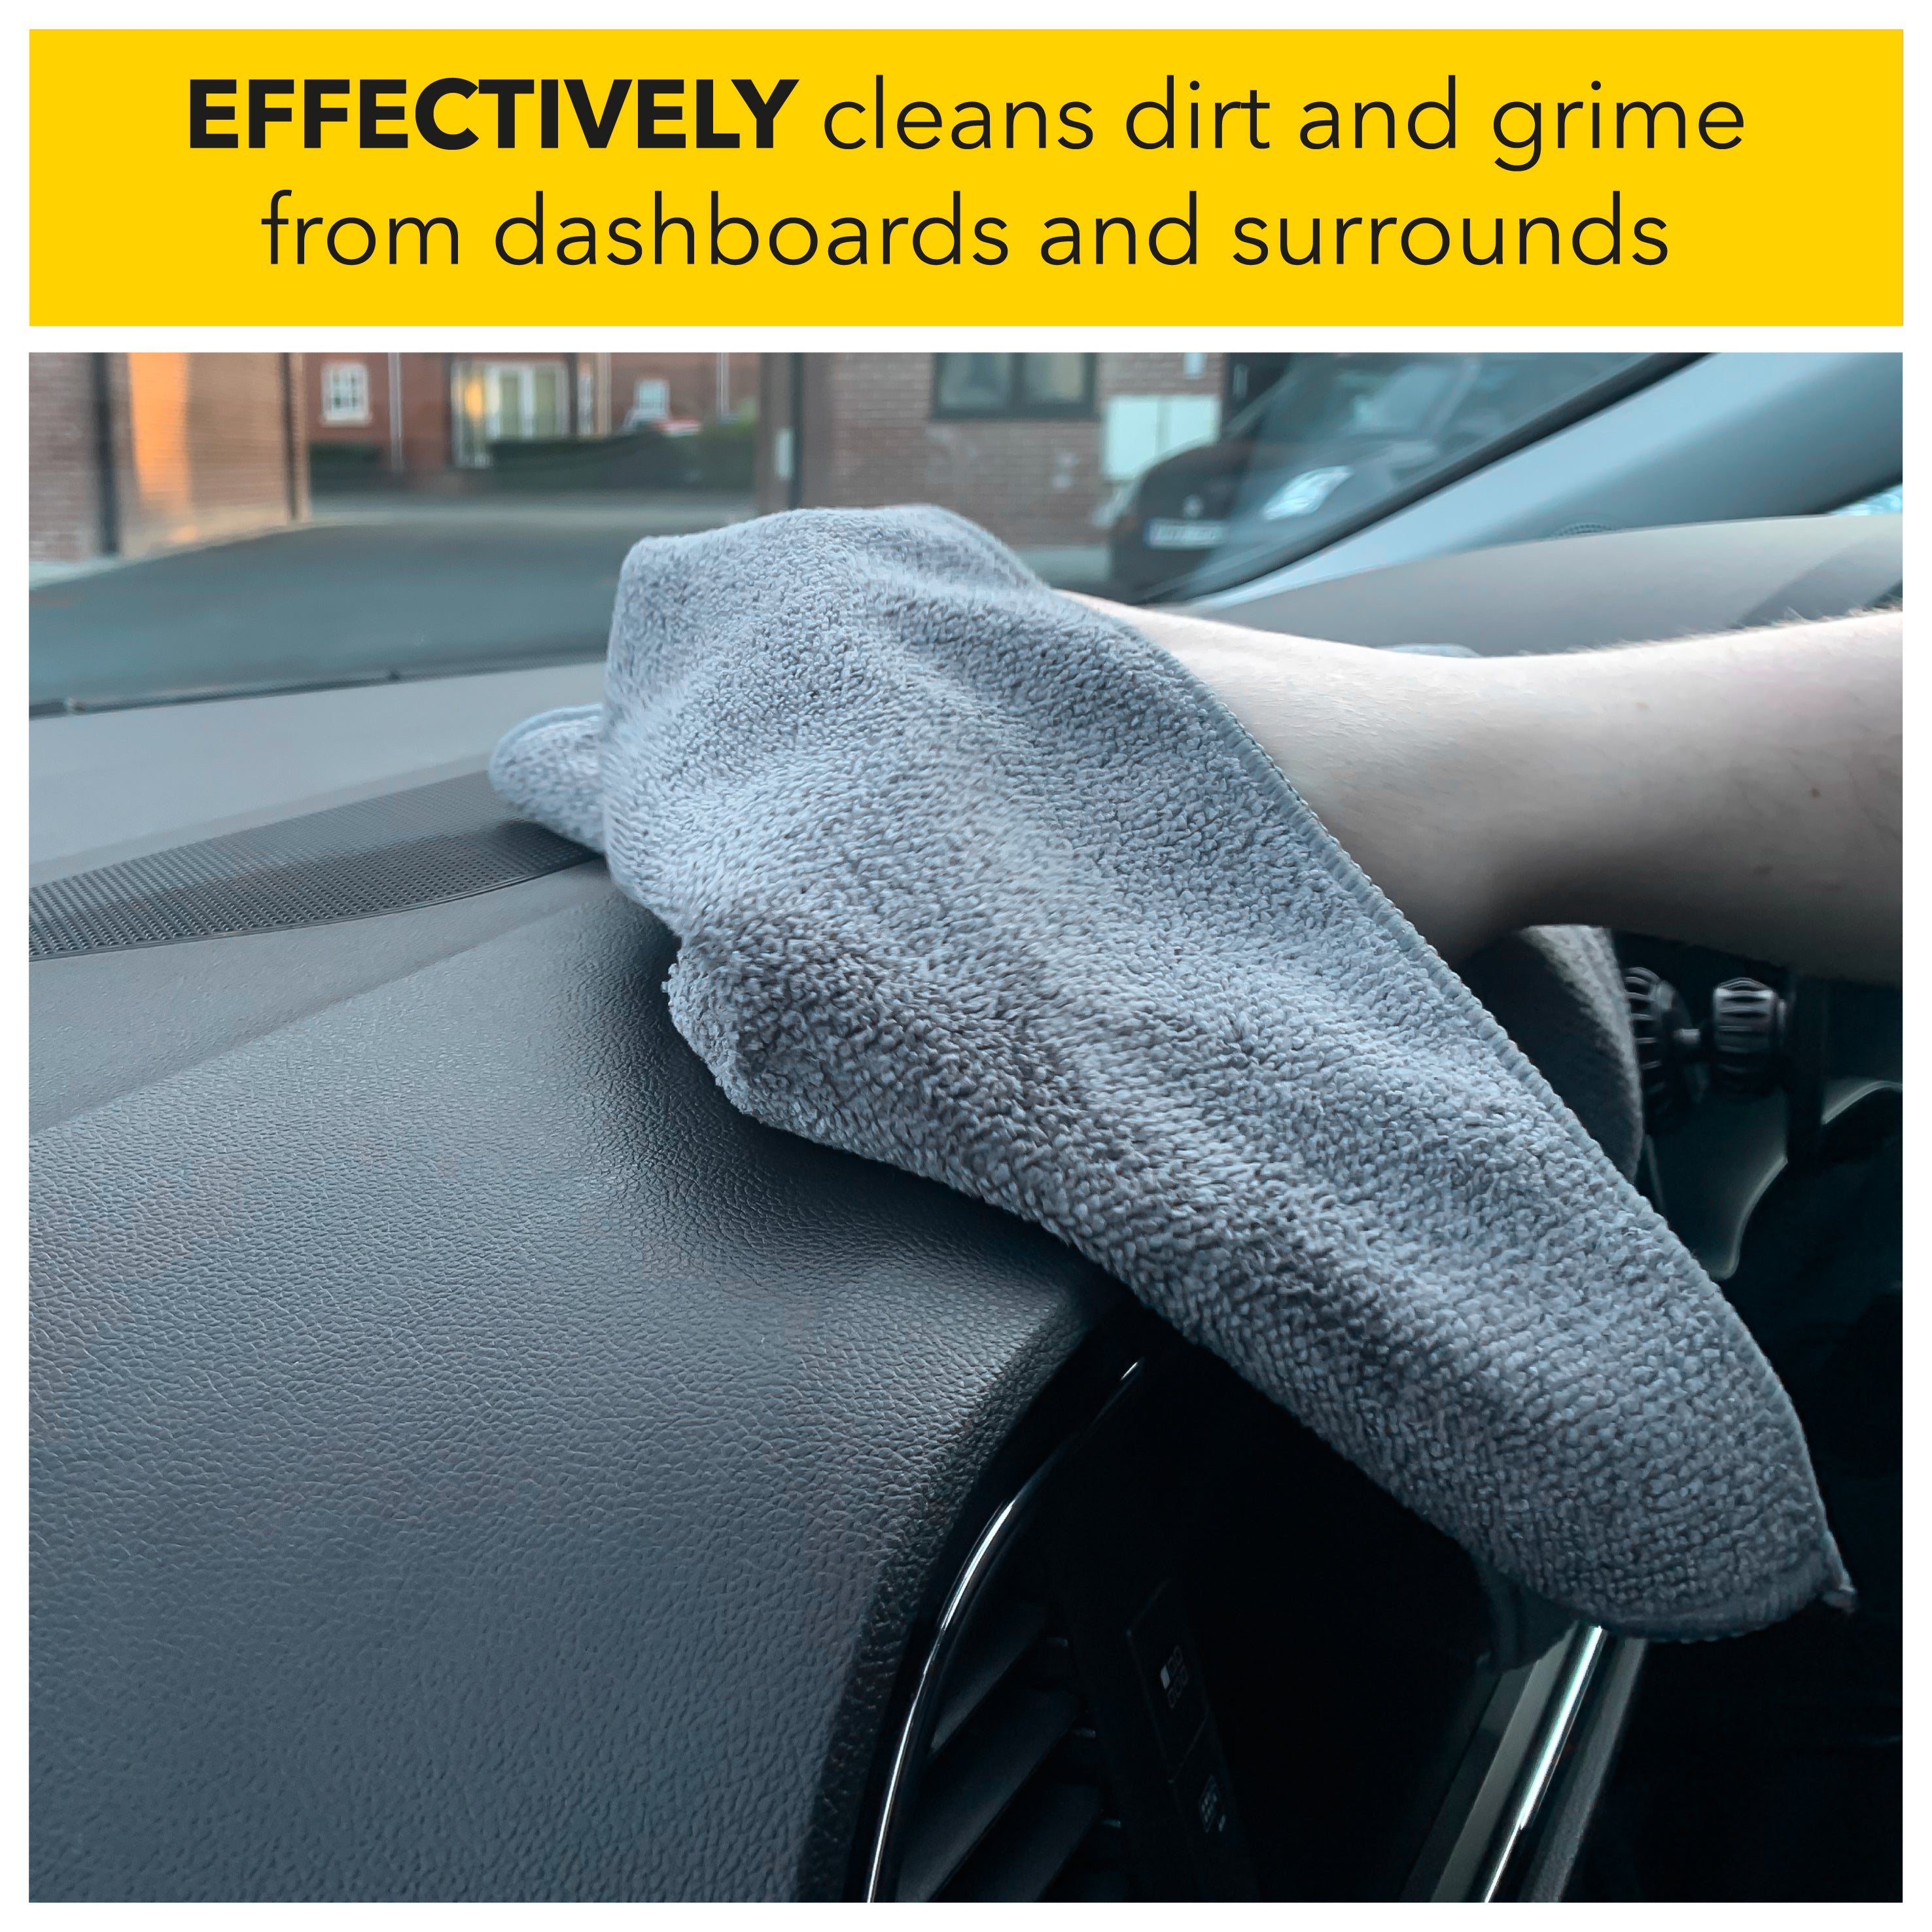 effectively cleans dirt and grime from dashboard and surrounds